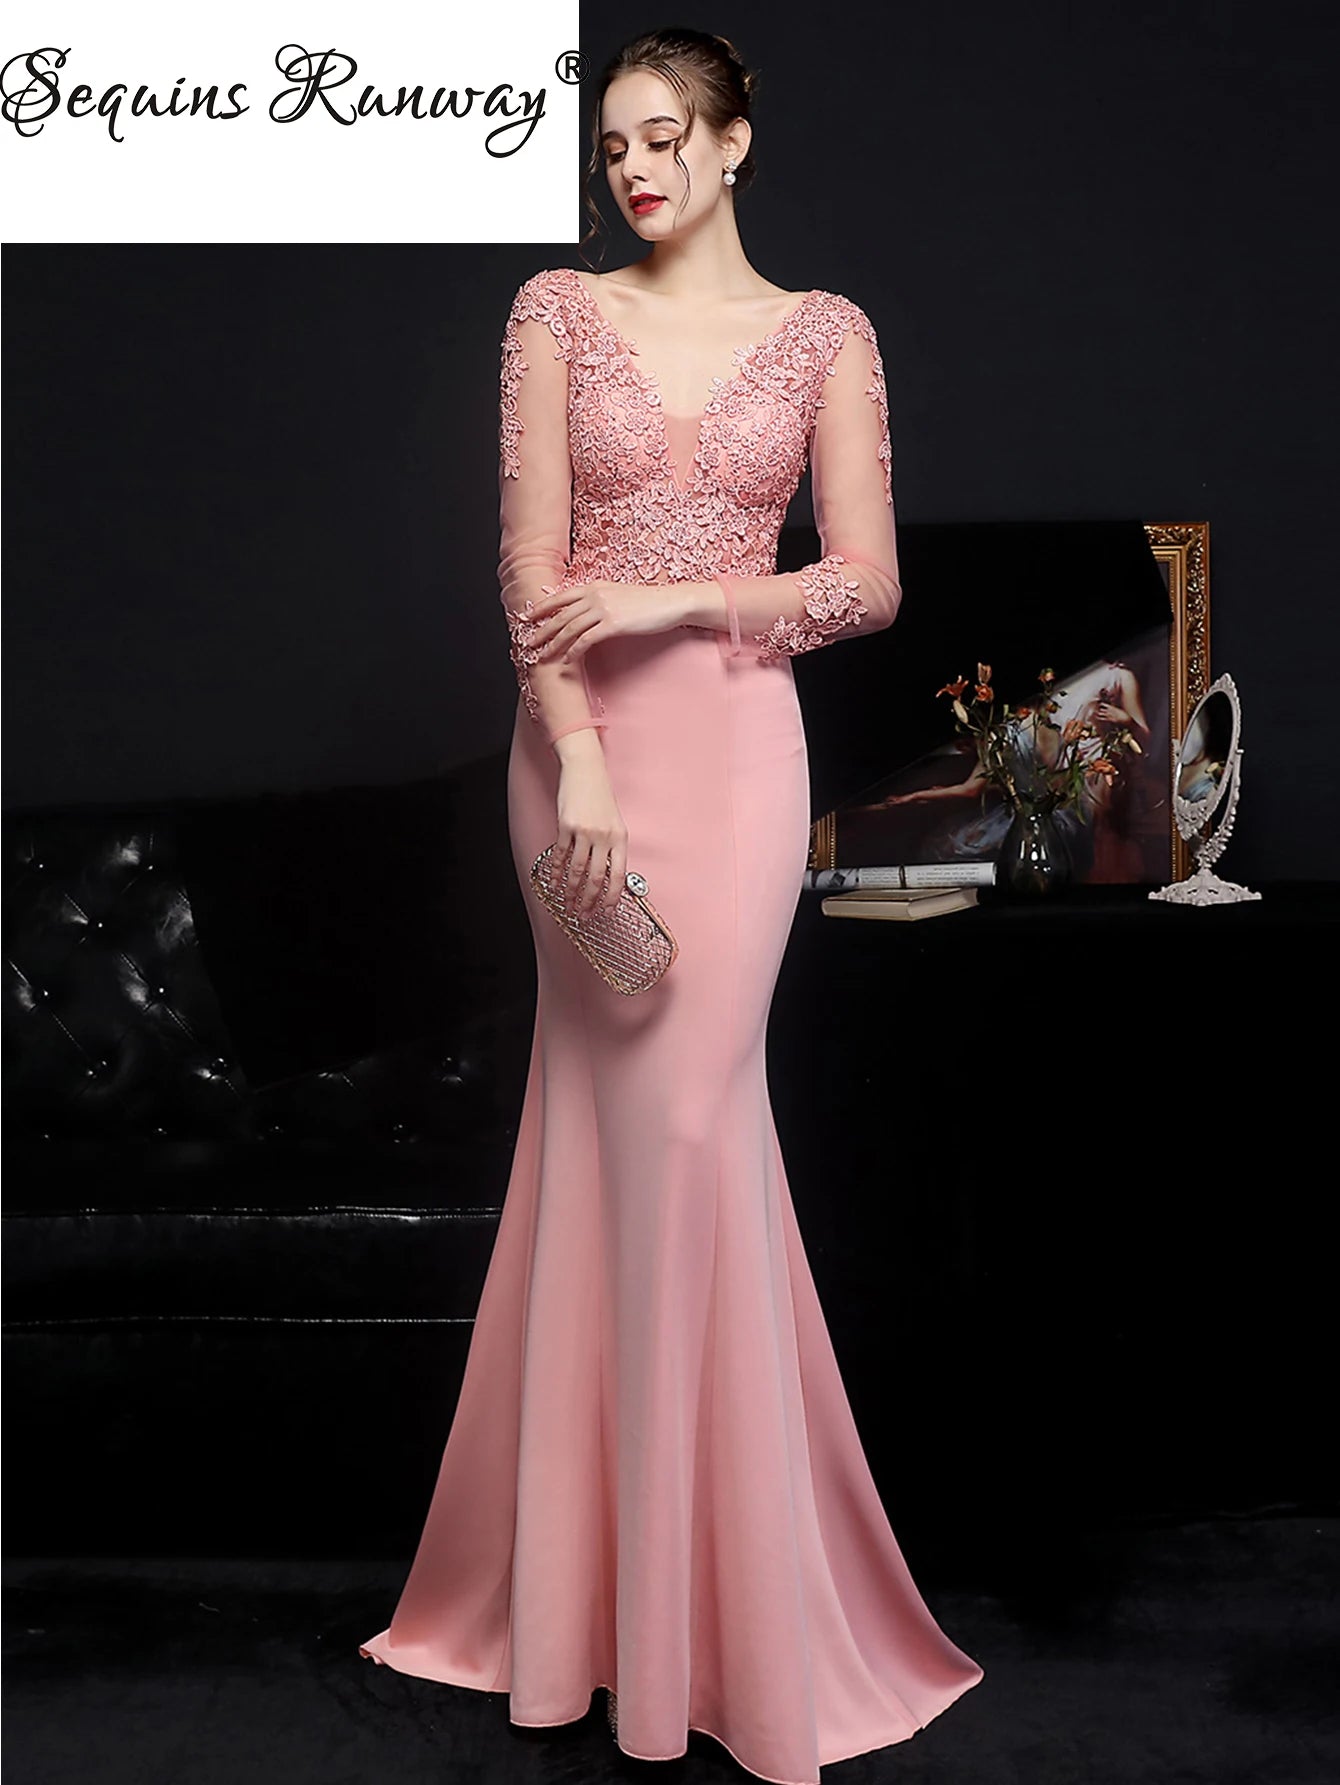 Sexy see through lace maxi summer dresses for women luxury wedding party dress elegant prom long sleeve evening dresses vestido